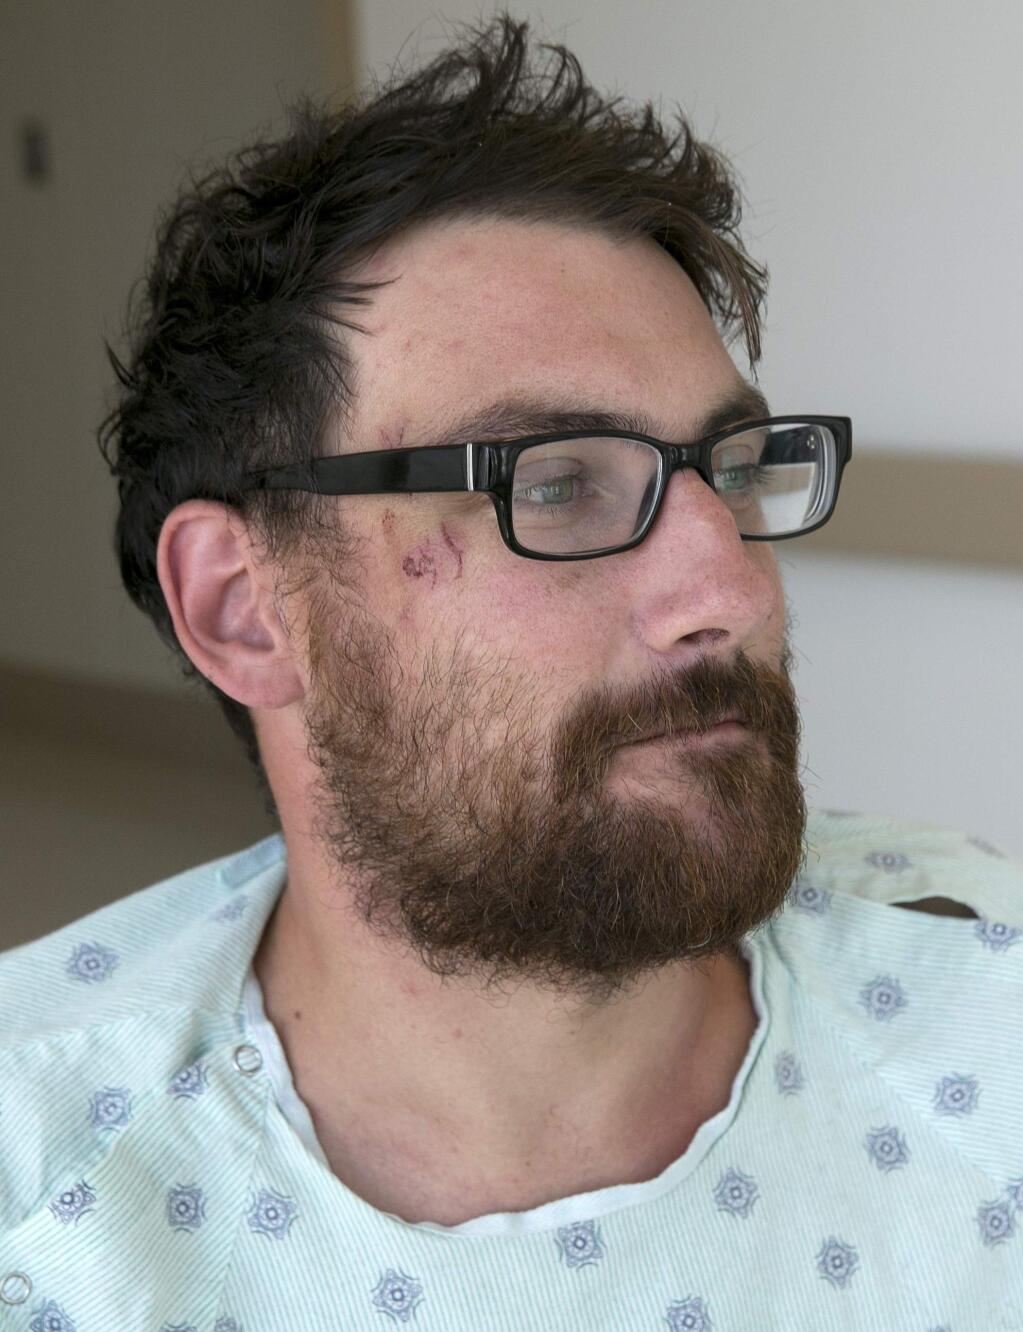 Mathias Steinhuber, of Innsbruck, Austria, who survived being struck by a lighting bolt, pauses while discussing the near-fatal event, Thursday, Aug. 24, 2017, in Sacramento, Calif. Steinhuber had been hiking the Pacific Crest Trail near Donner Summit Tuesday when he stopped to take a photo and was hit by the lighting. He was taken by helicopter to the the Tahoe Forest Hospital in Truckee, before being flown to the University of California, Davis Hospital Burn Center where he is listed in fair condition. He said he received the wound near his eye from falling on rocks after the lighting strike. (AP Photo/Rich Pedroncelli)